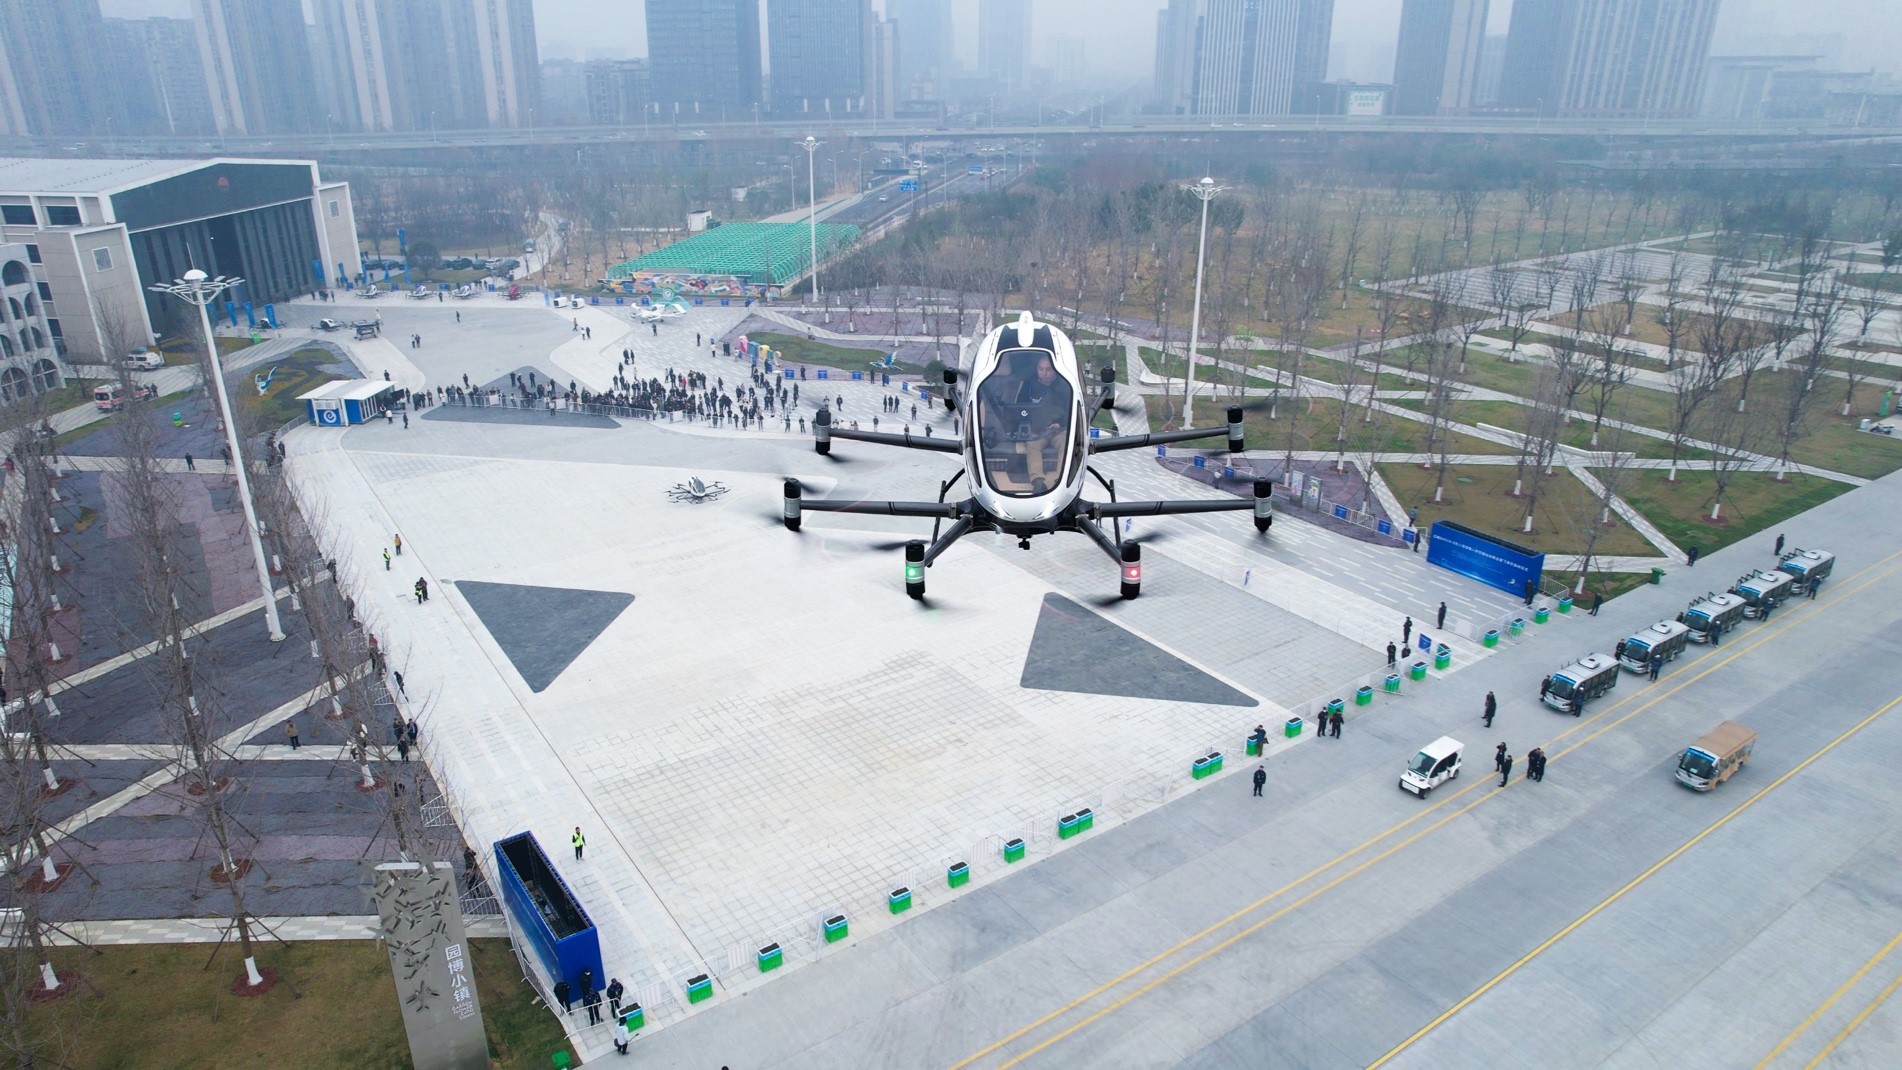 EH216-S completed commercial flight demonstration at Hefei Luogang Central Park.